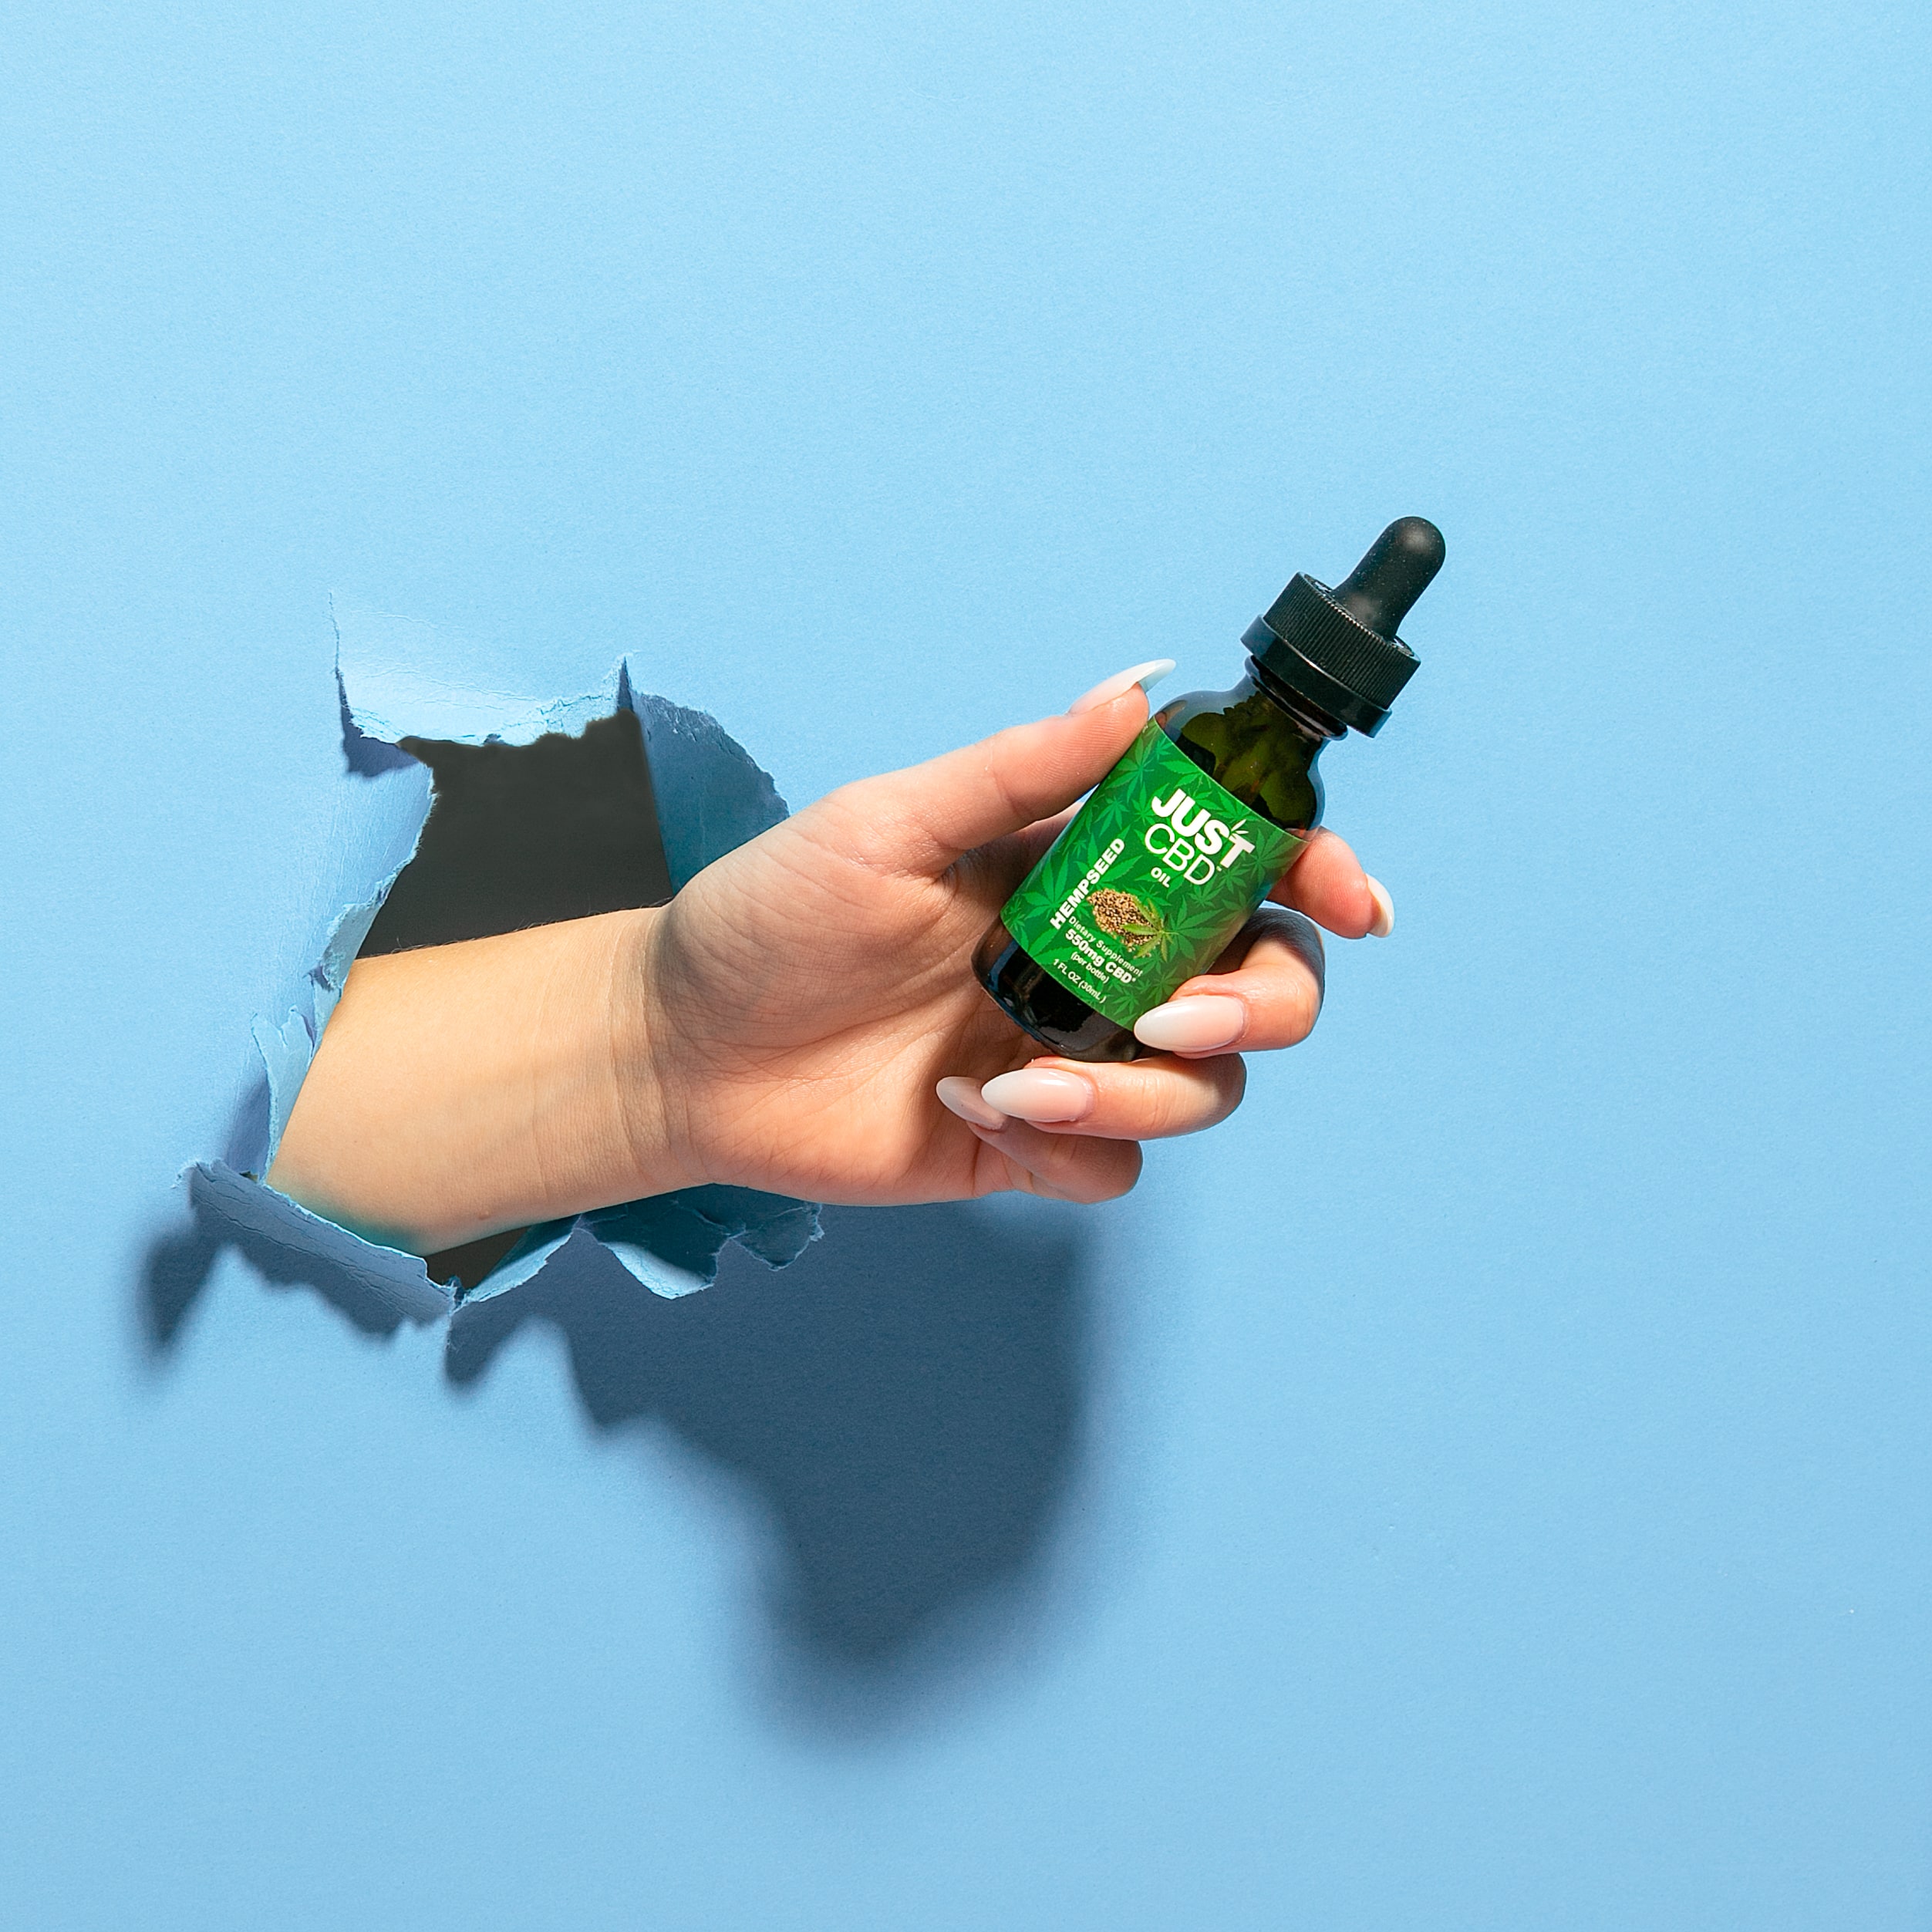 CBD TOPICALS VS. CBD OIL: WHAT ARE THE KEY DIFFERENCES?